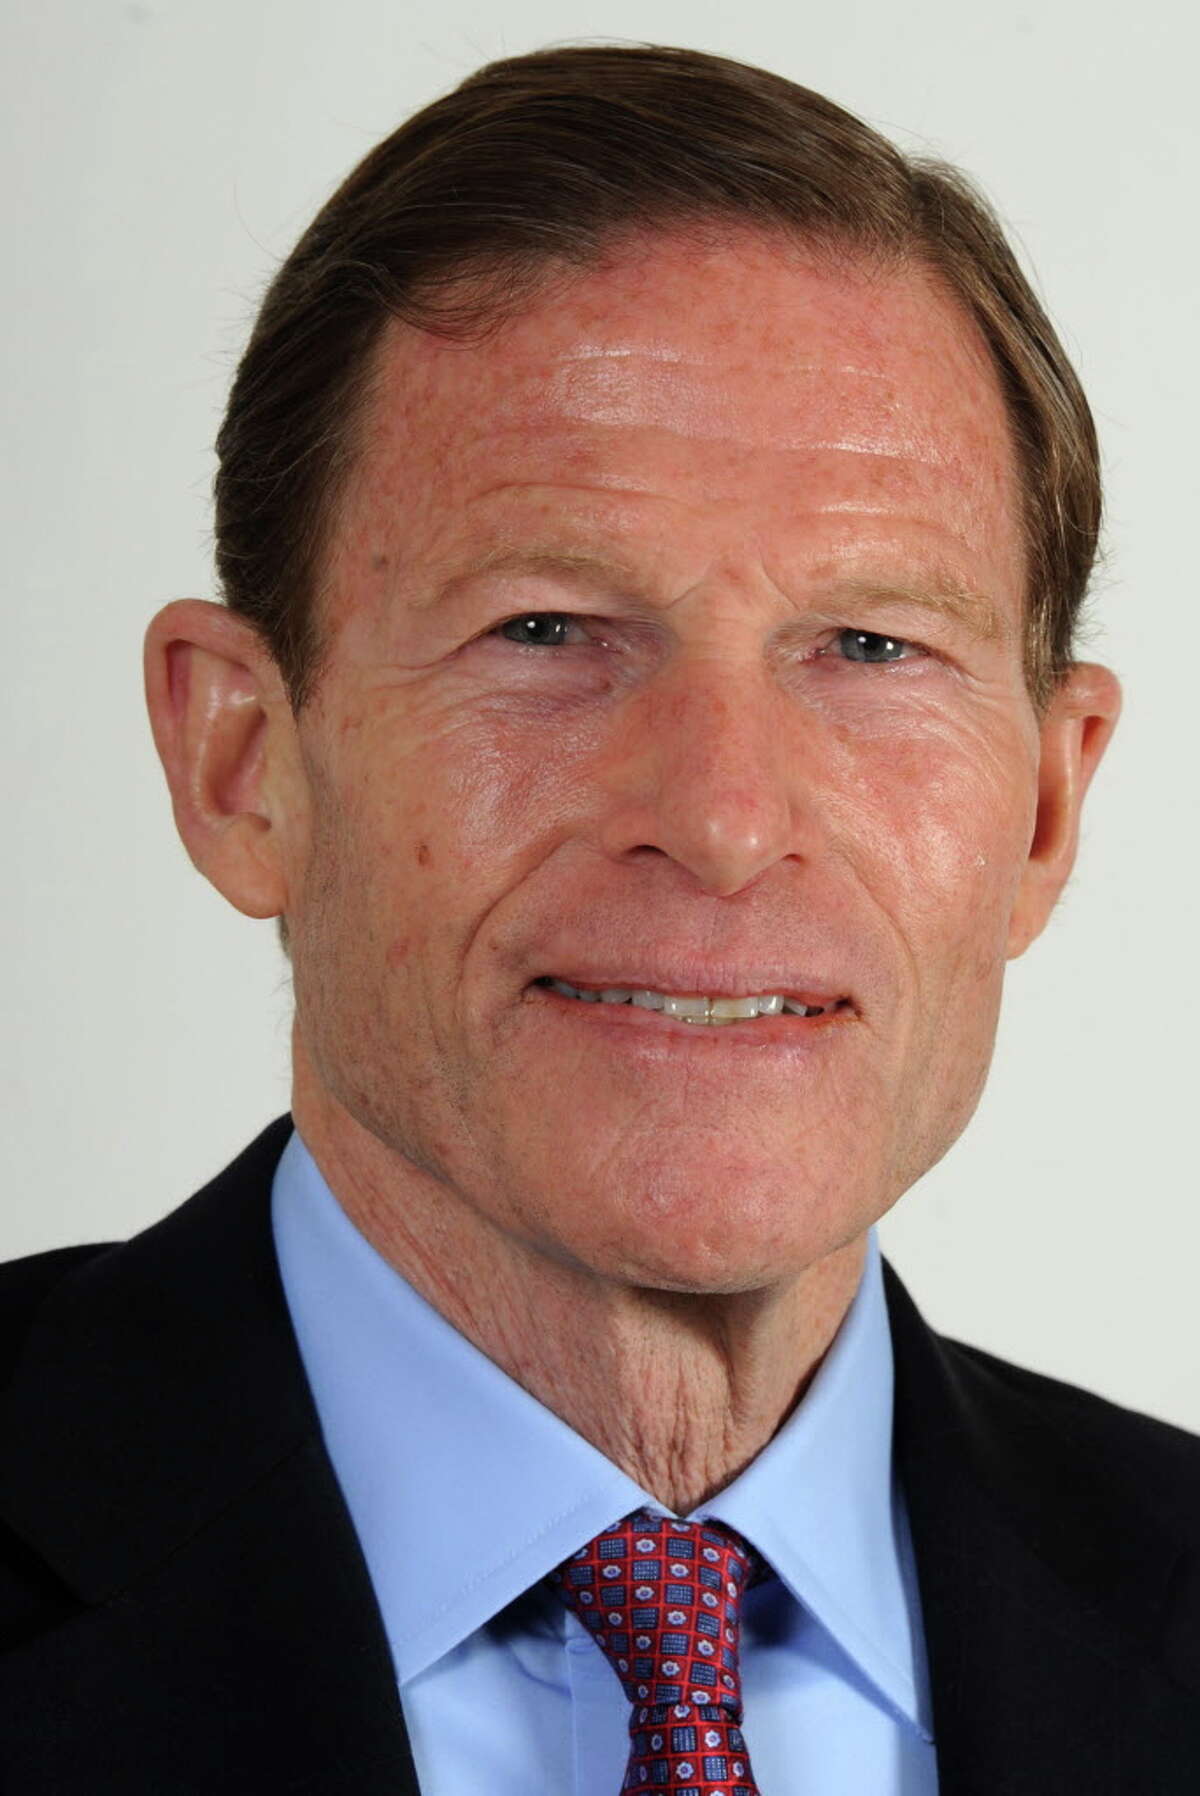 Sen. Richard Blumenthal, D-Conn. meets with the Hearst Connecticiut Media editorial board on Monday, April 11, 2016 in Bridgeport, Conn.